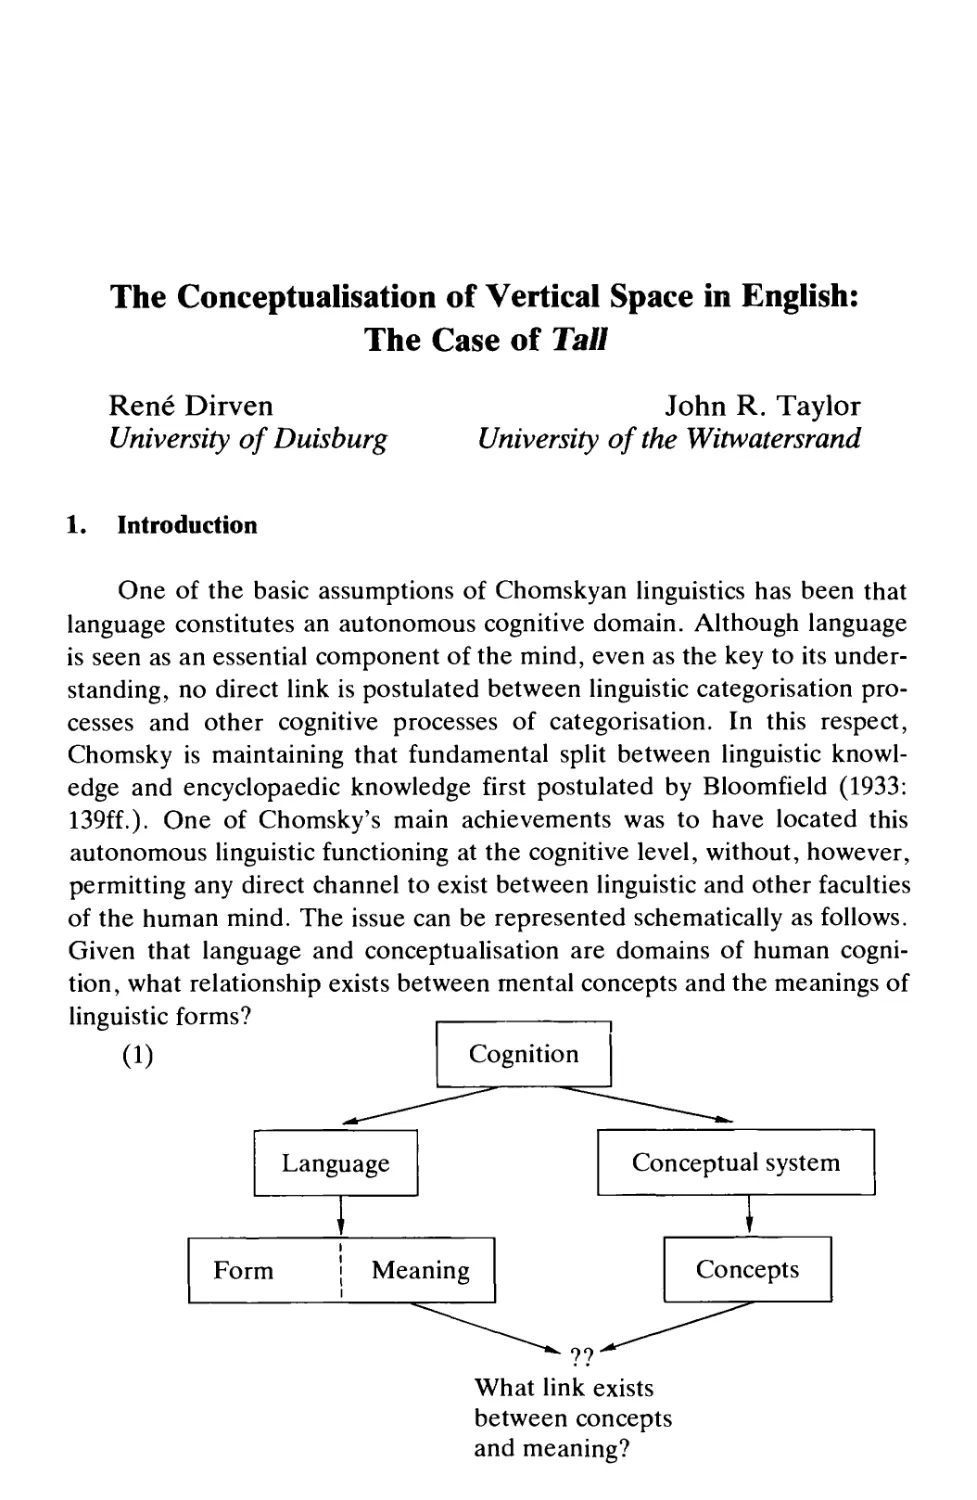 The Conceptualisation of Vertical Space in English: The Case of Tall